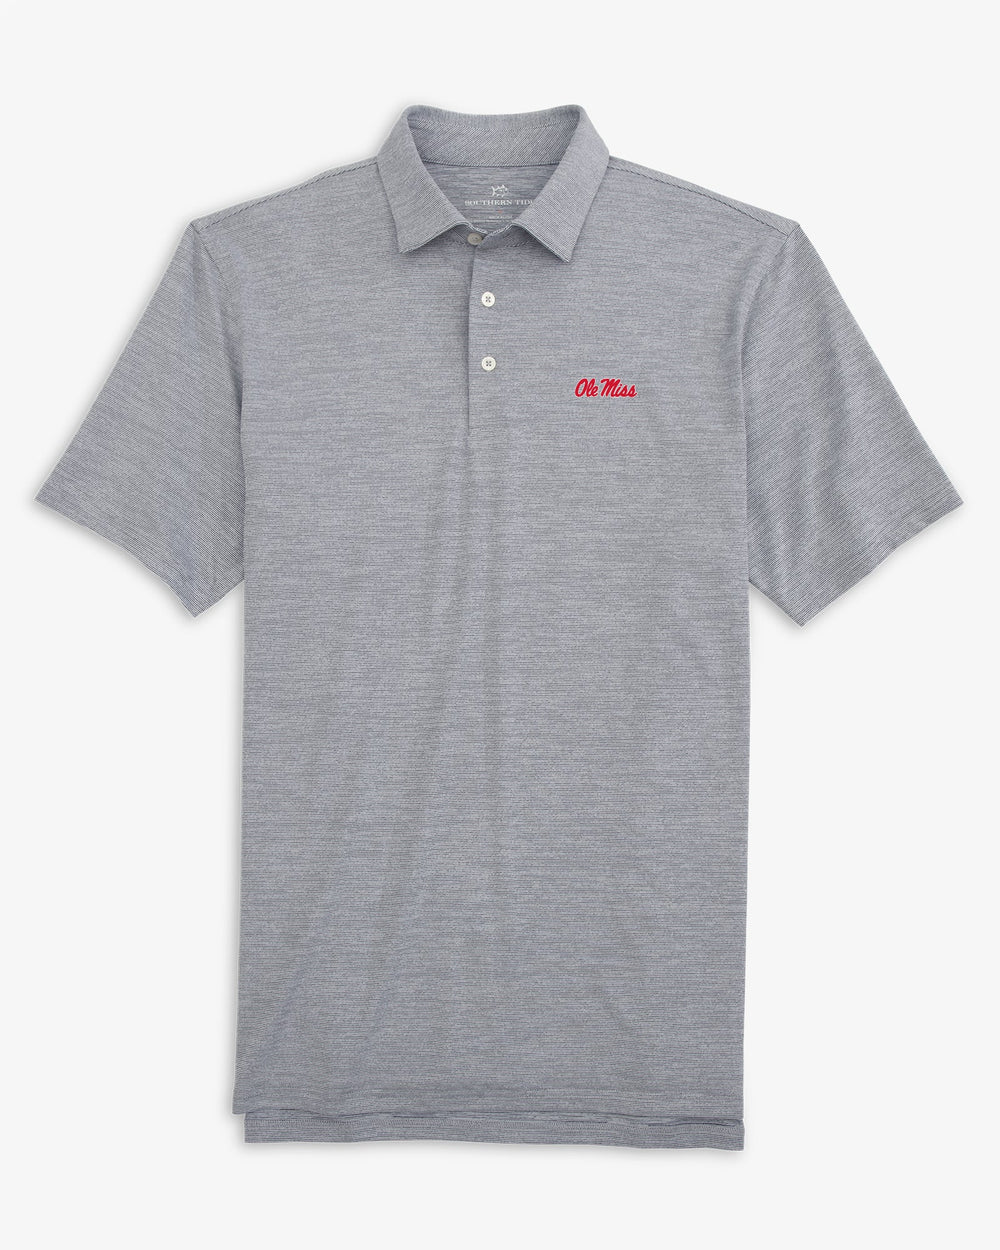 The front of the Ole Miss Driver Spacedye Polo Shirt by Southern Tide - Navy